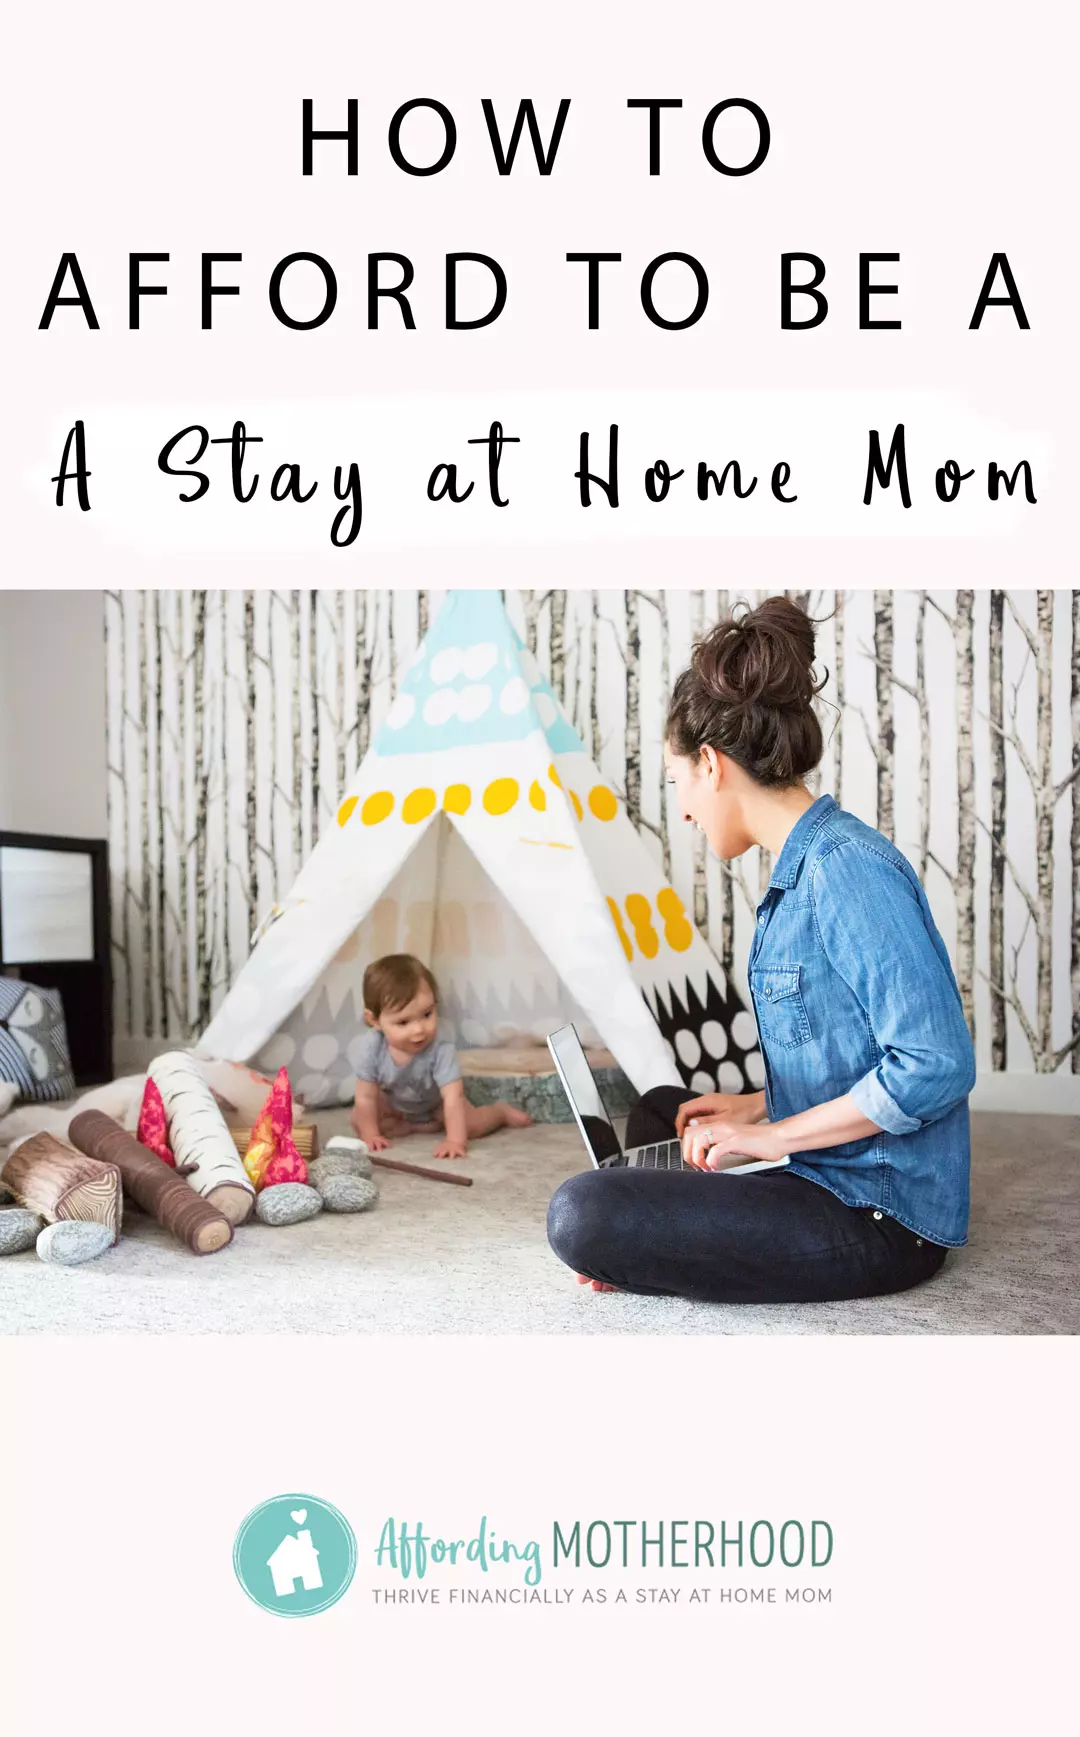 The rise of the stay-at-home working mom